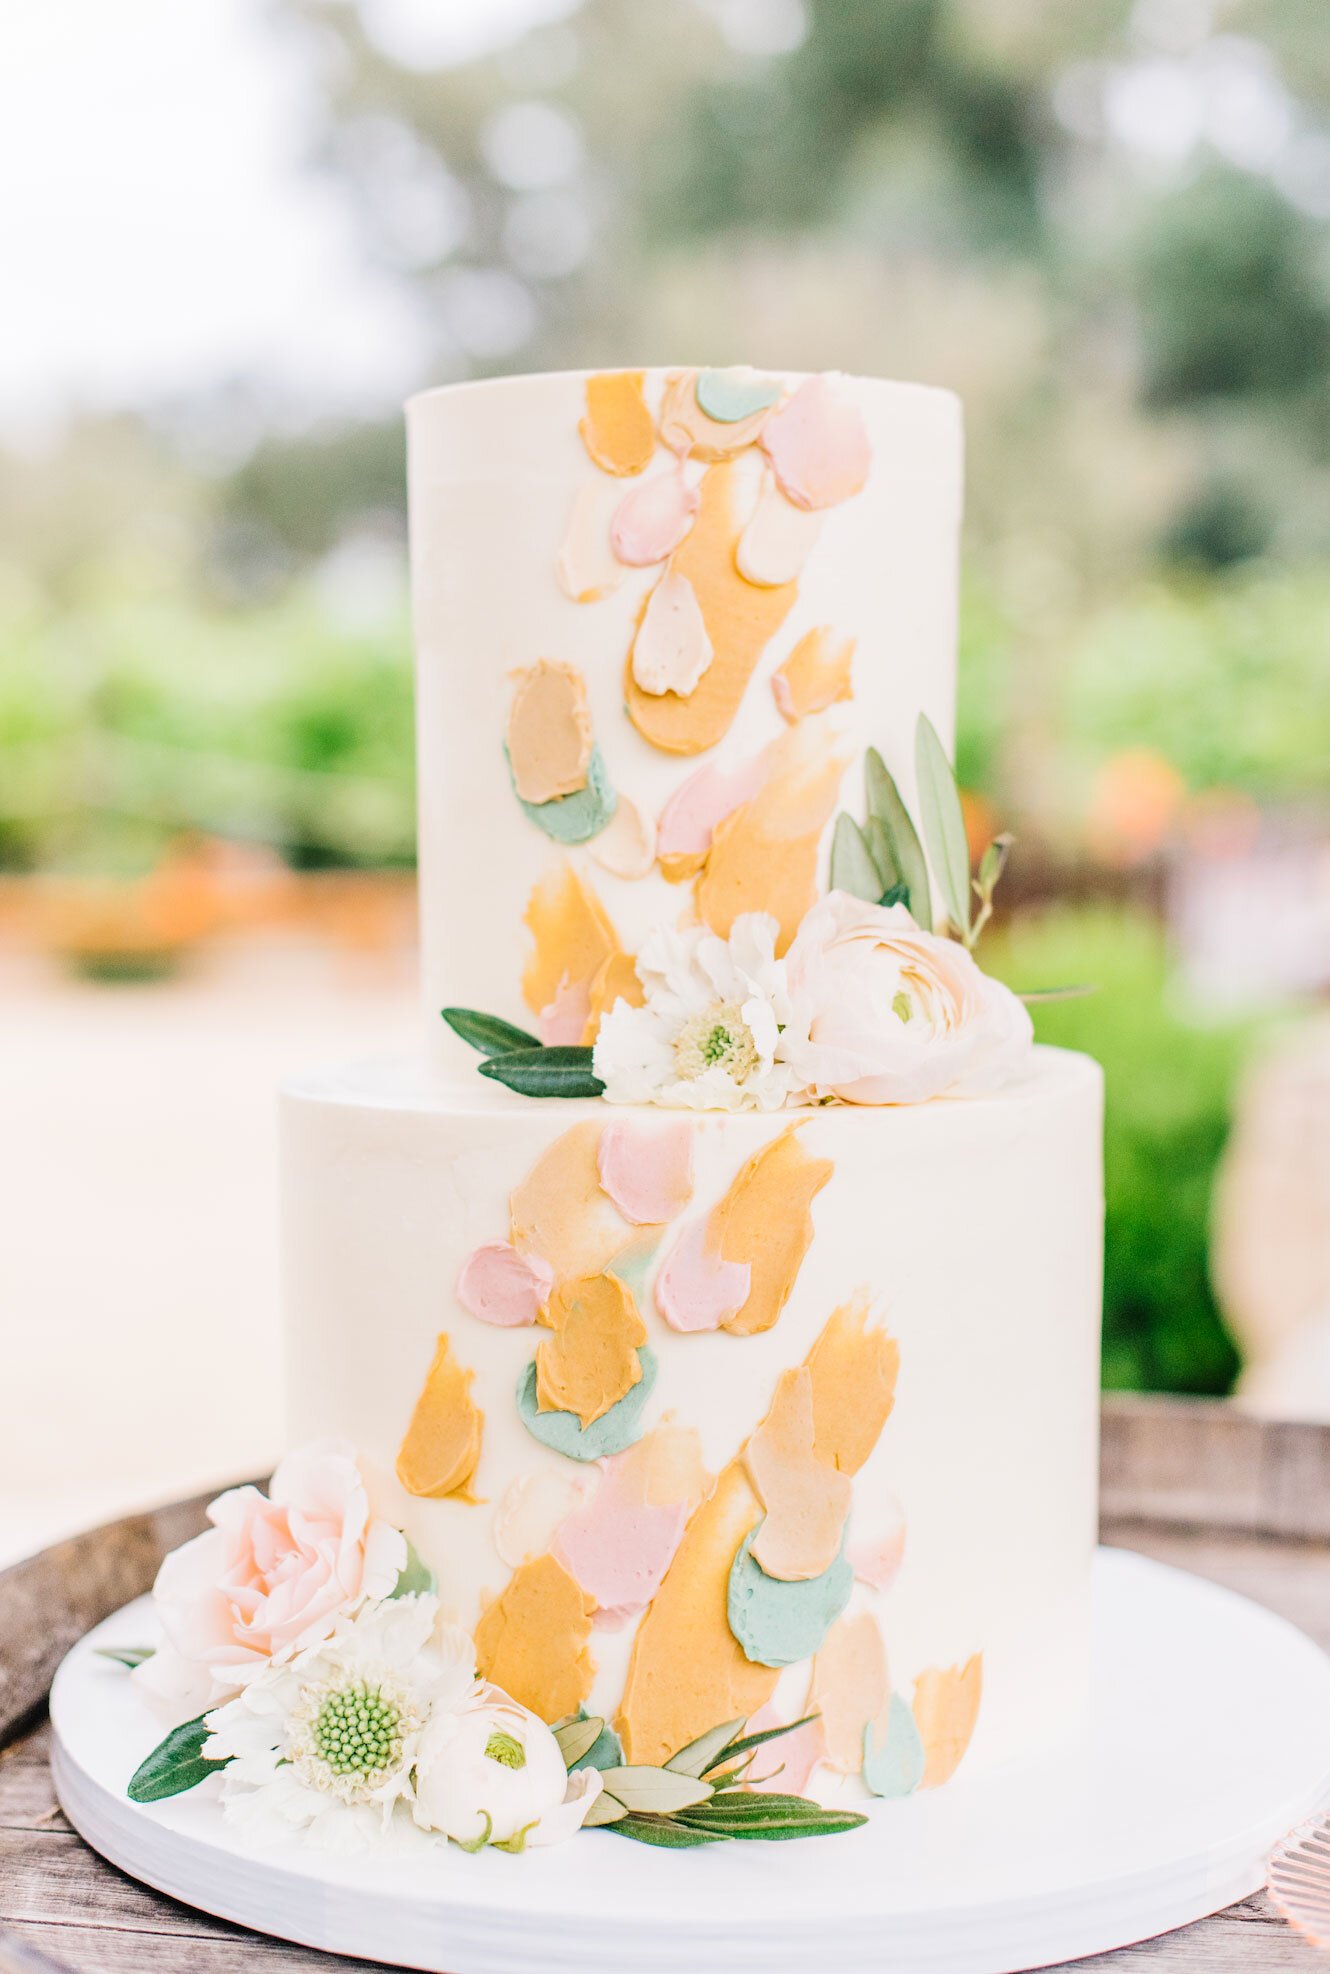 www.santabarbarawedding.com | White Sage | Topa Mountain Winery | Cara Robbins Studios | Olivetta Flowers | Lilac Patisserie | Two Tiered White Wedding Cake with Orange, Pink, and Blue Details